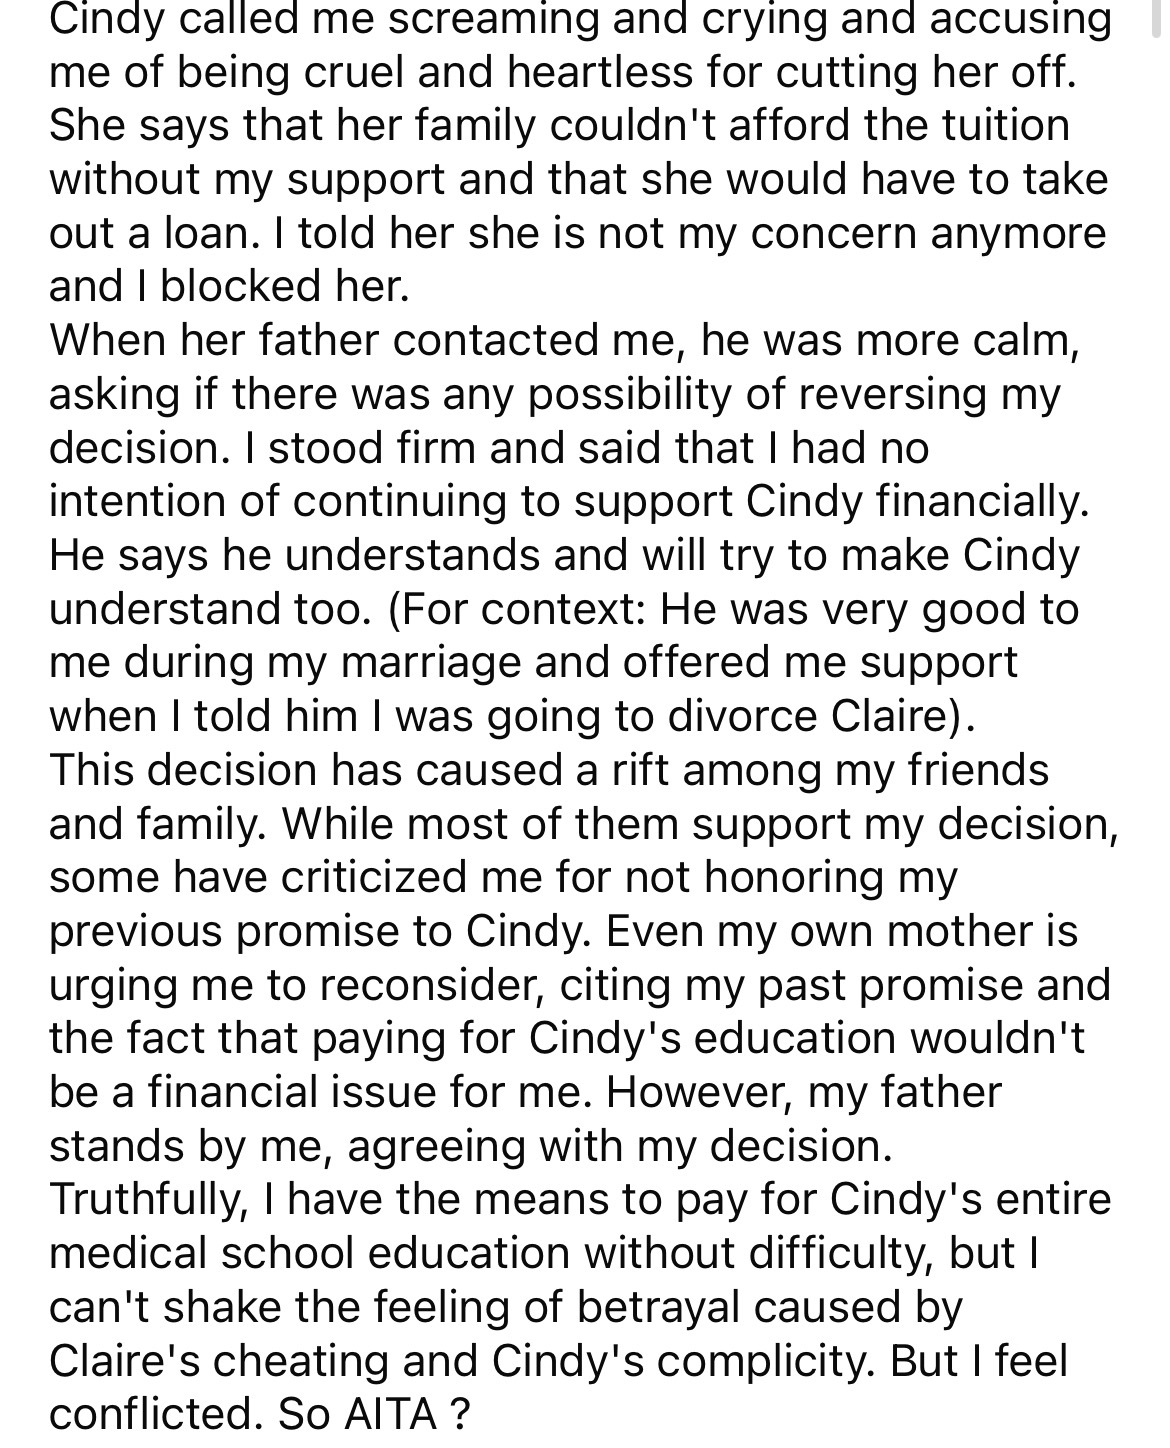 document - Cindy called me screaming and crying and accusing me of being cruel and heartless for cutting her off. She says that her family couldn't afford the tuition without my support and that she would have to take out a loan. I told her she is not my 